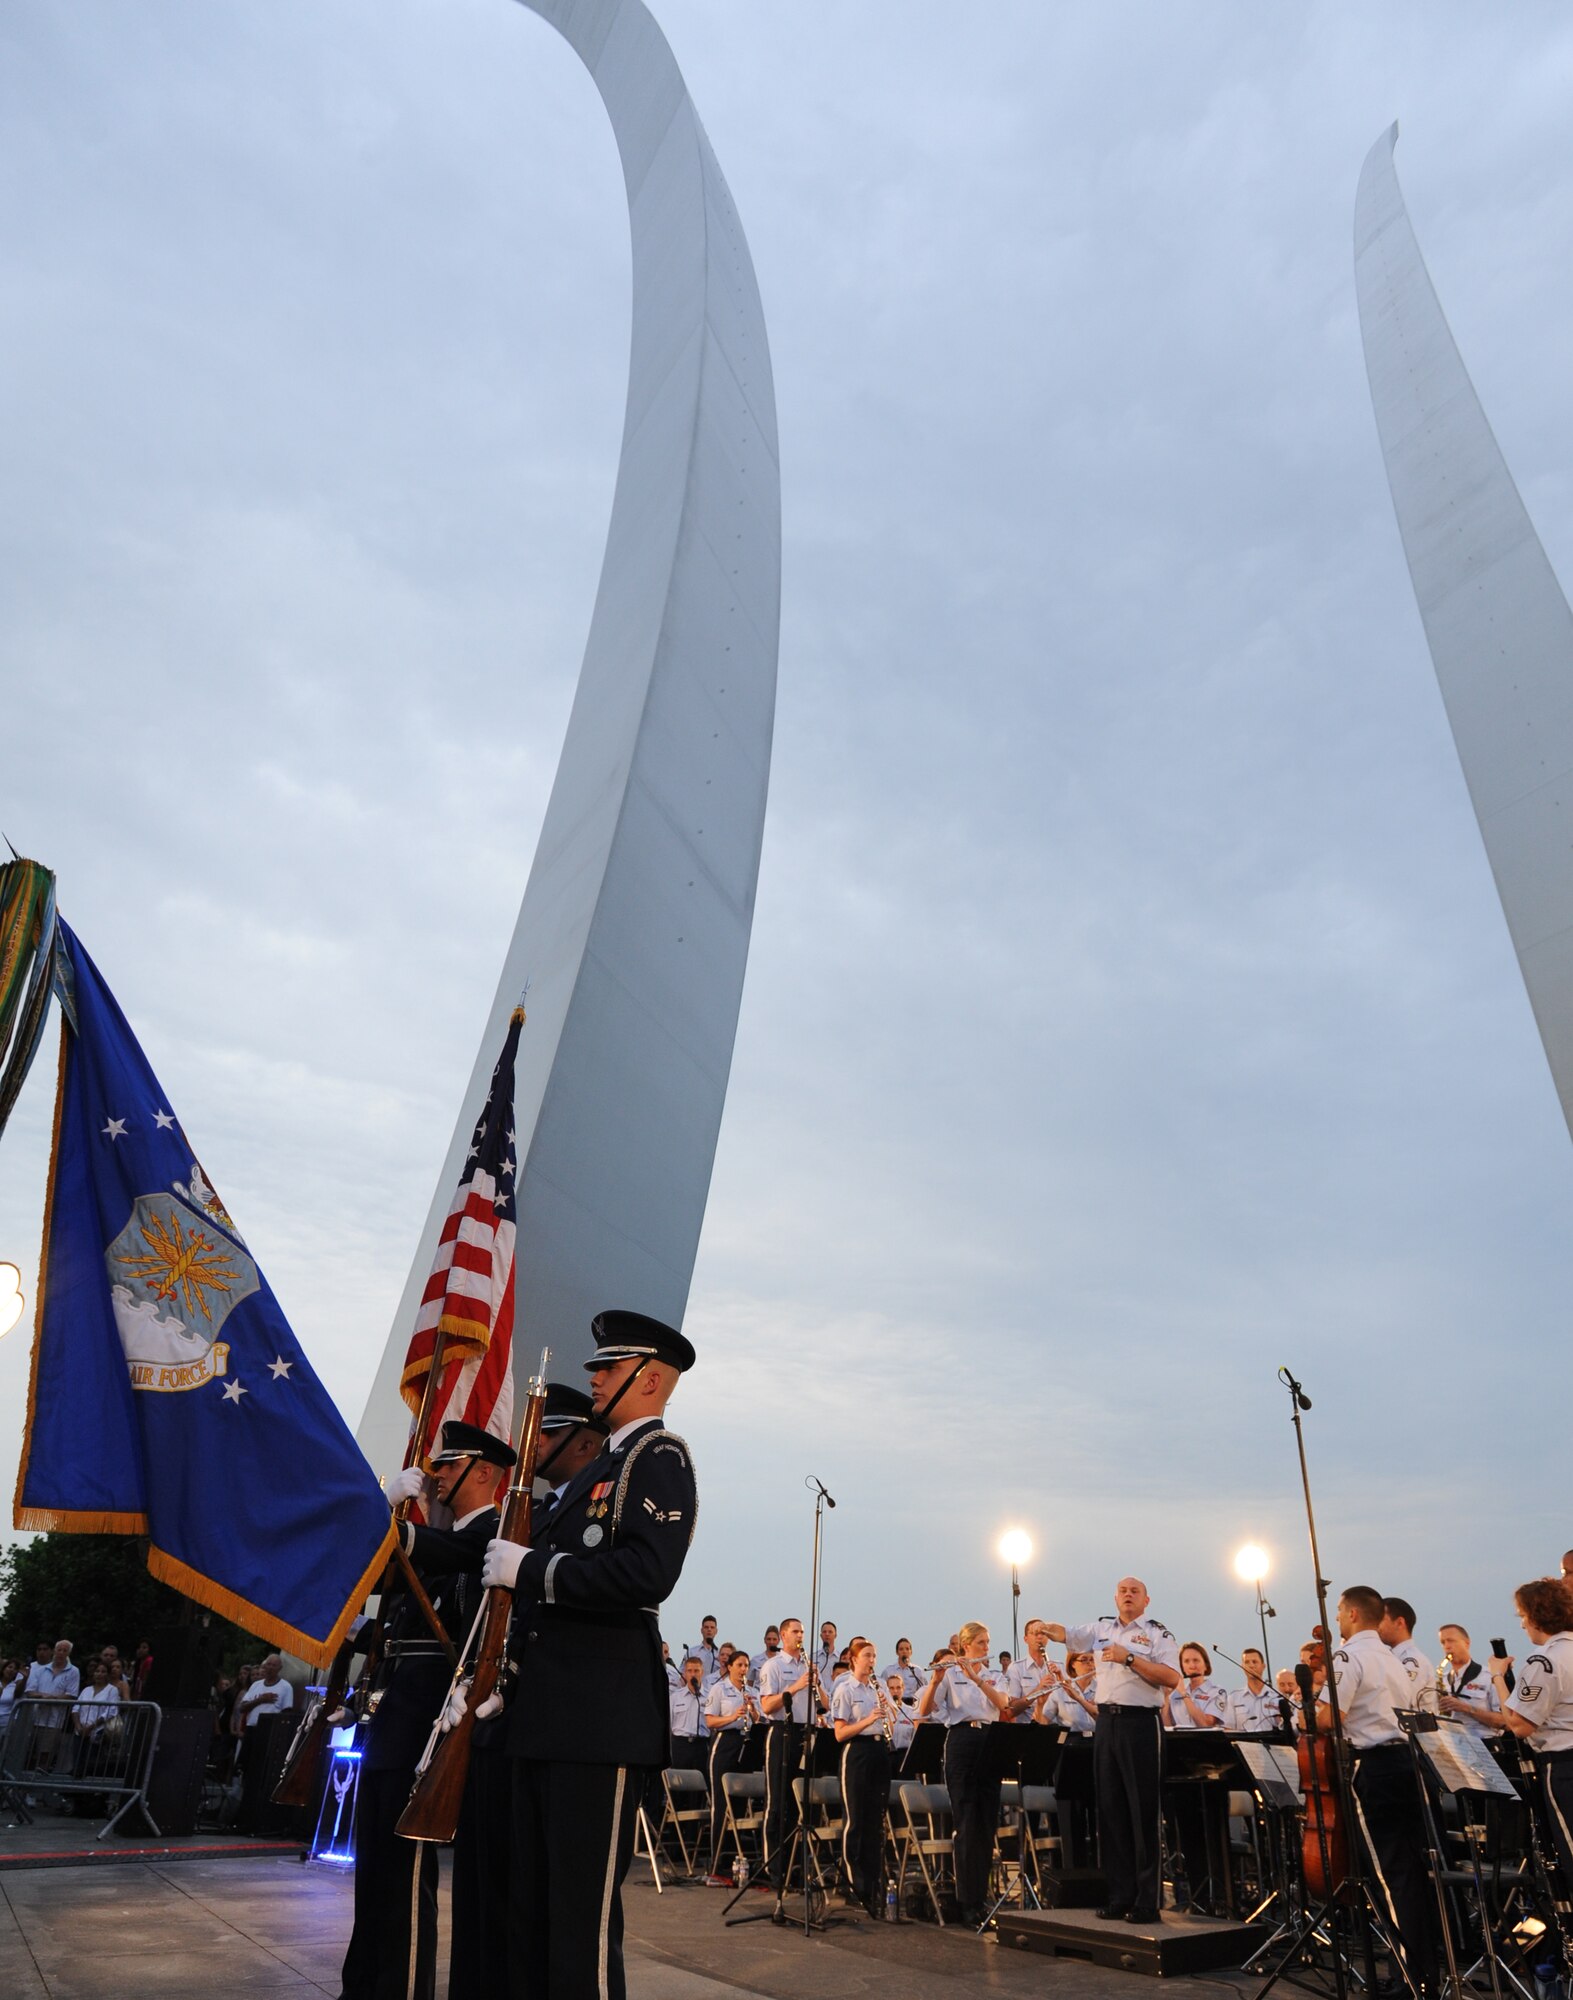 The U.S. Air Force Honor Guard colors guard presents the colors during the USAF Band’s Independence Day performance at the Air Force Memorial, Arlington, Va., July 4, 2011. Following the presentation, The U.S. Air Force Band performed for the 400 spectators awaiting the Washington D.C. fireworks display. (U.S. Air Force photo by Staff Sgt. Christopher Ruano)